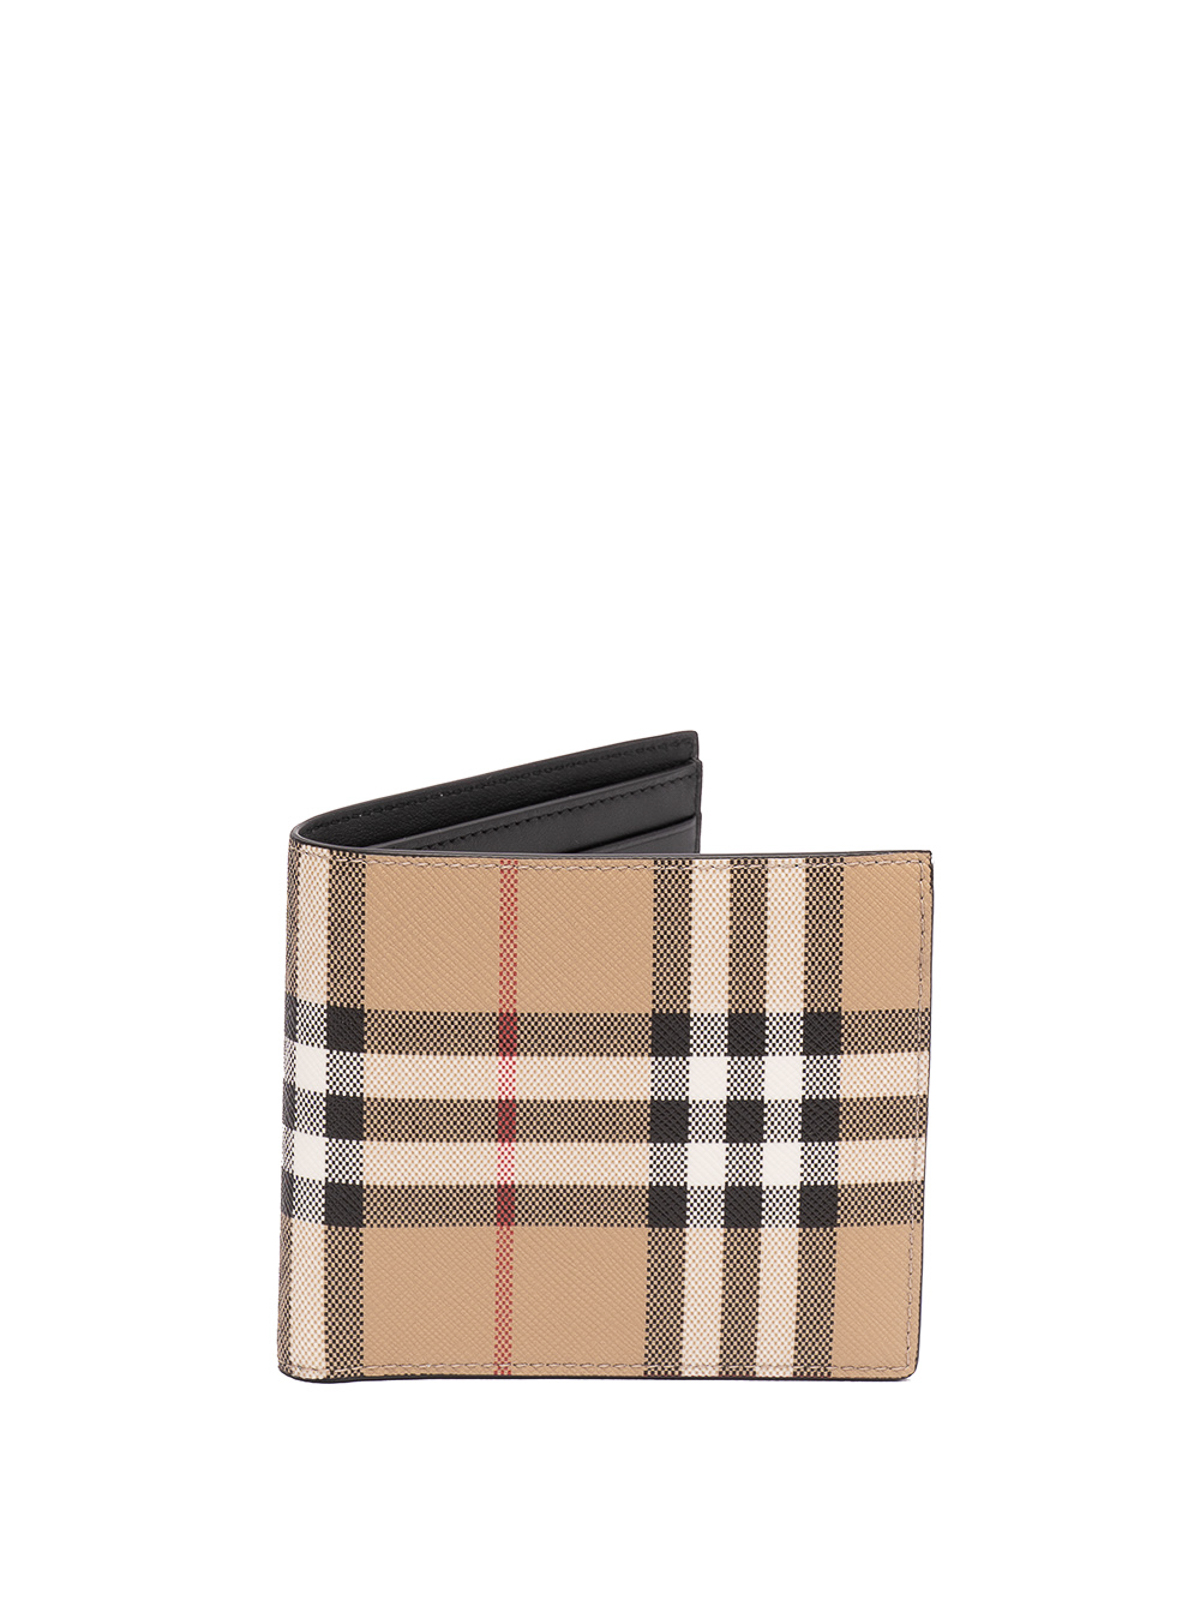 Burberry Unisex Checkered Leather Multi-Color Credit Card Case